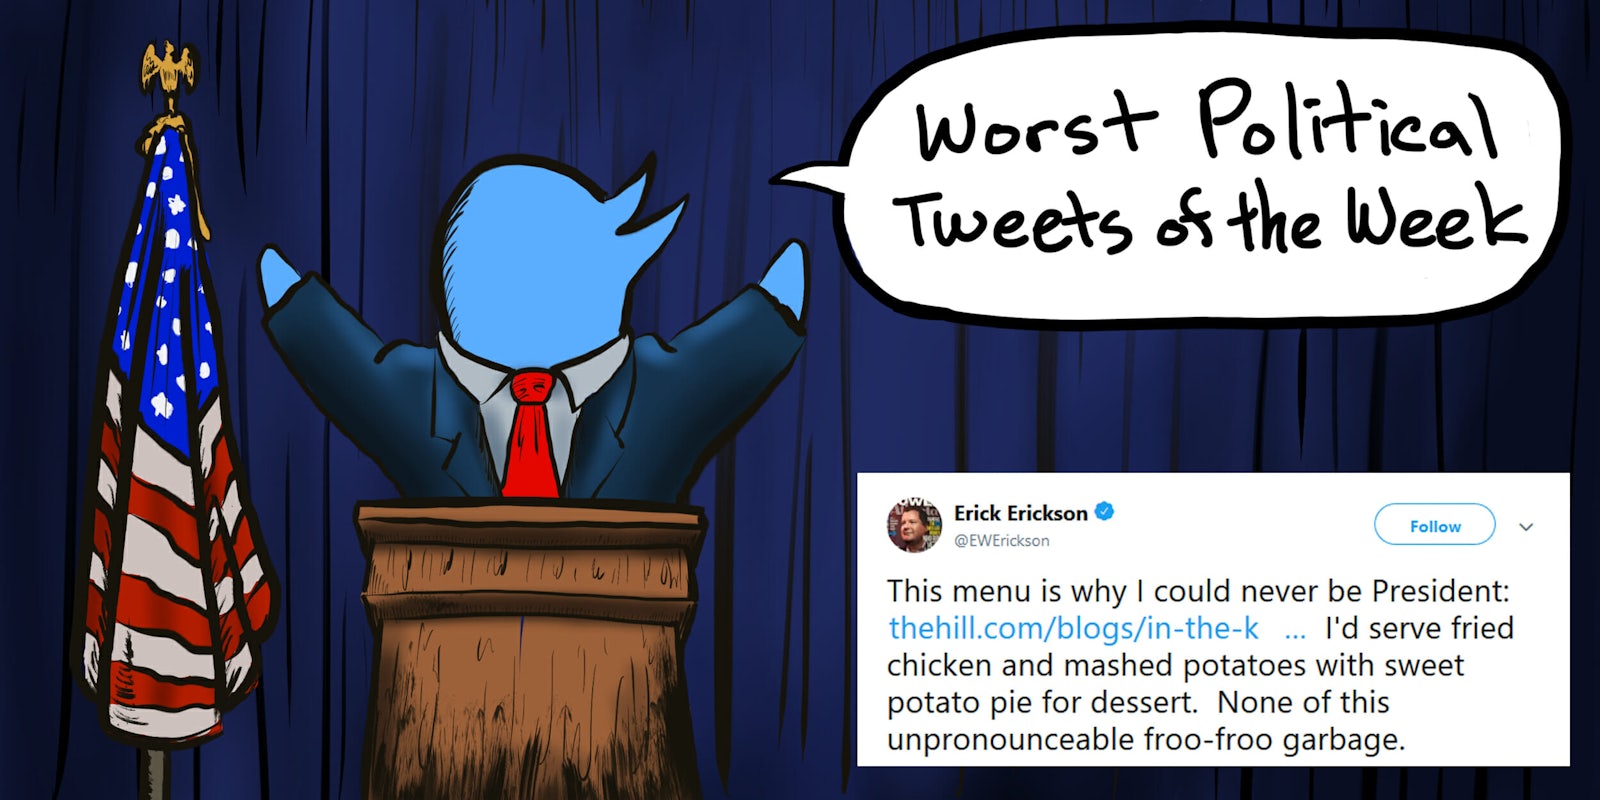 The Daily Dot rounds up the worst political tweets of the week from April 20 to April 27.